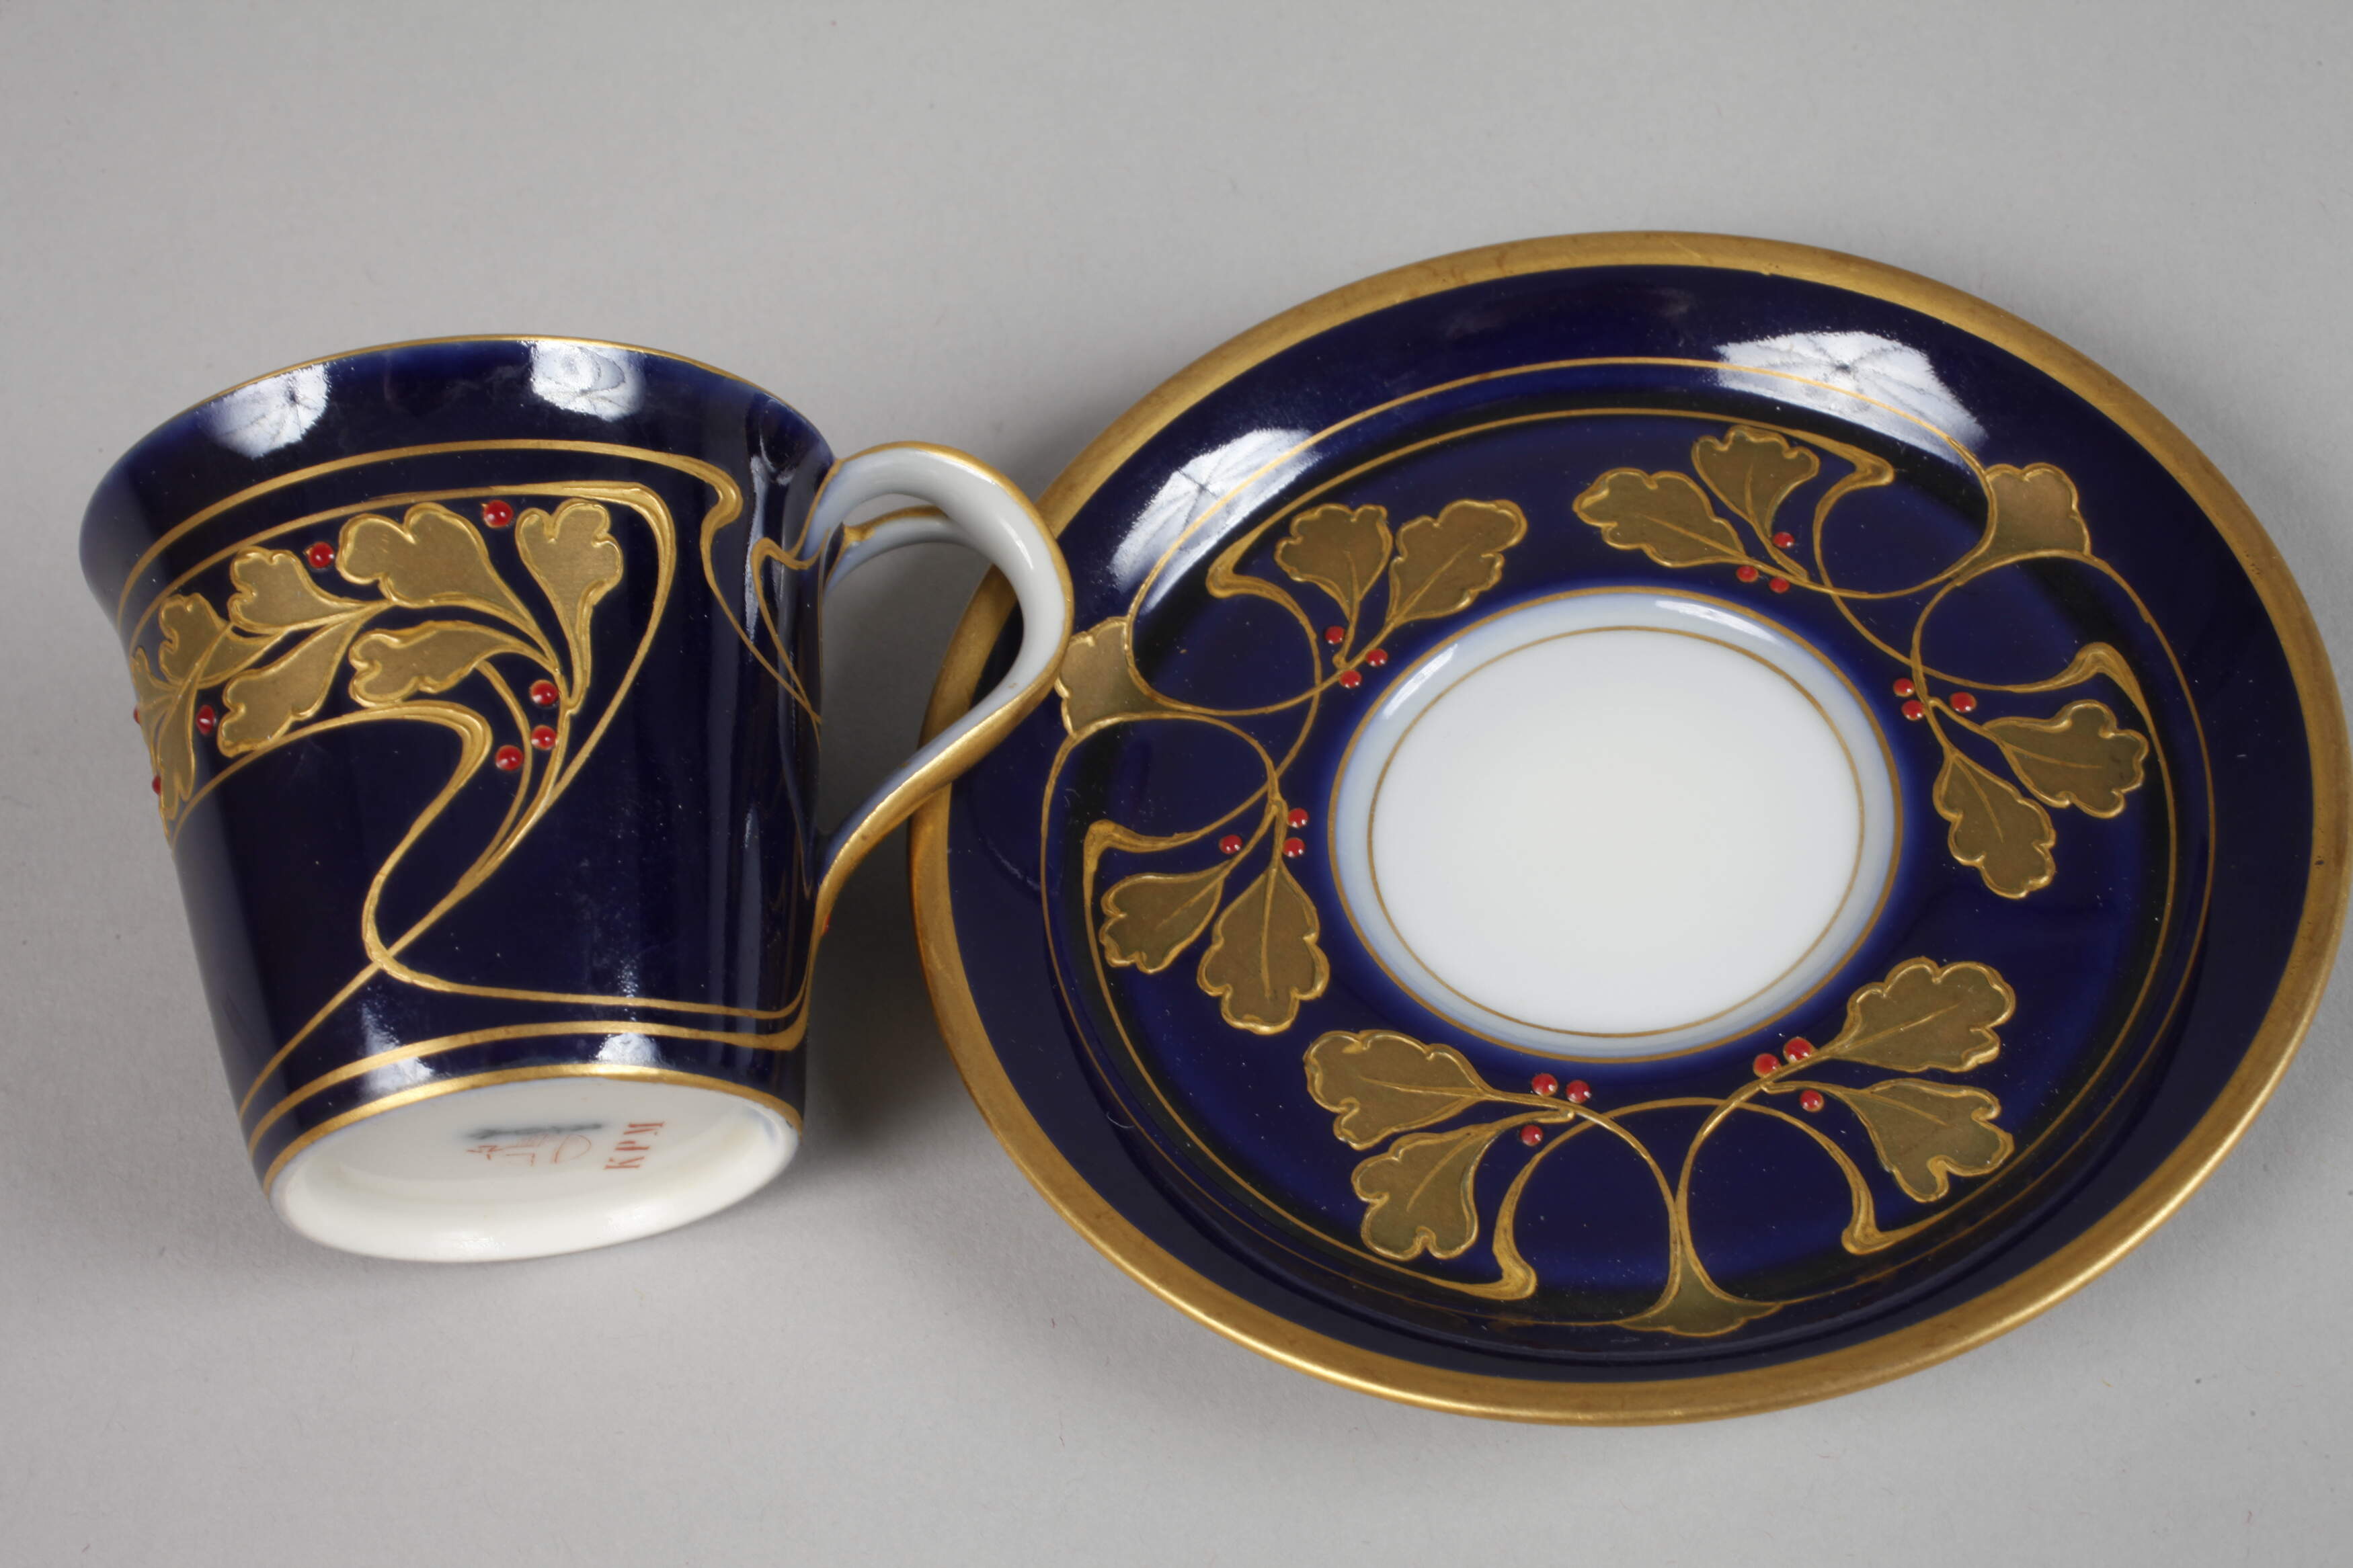 KPM Berlin demitasse cup painted in gold in relief - Image 2 of 3